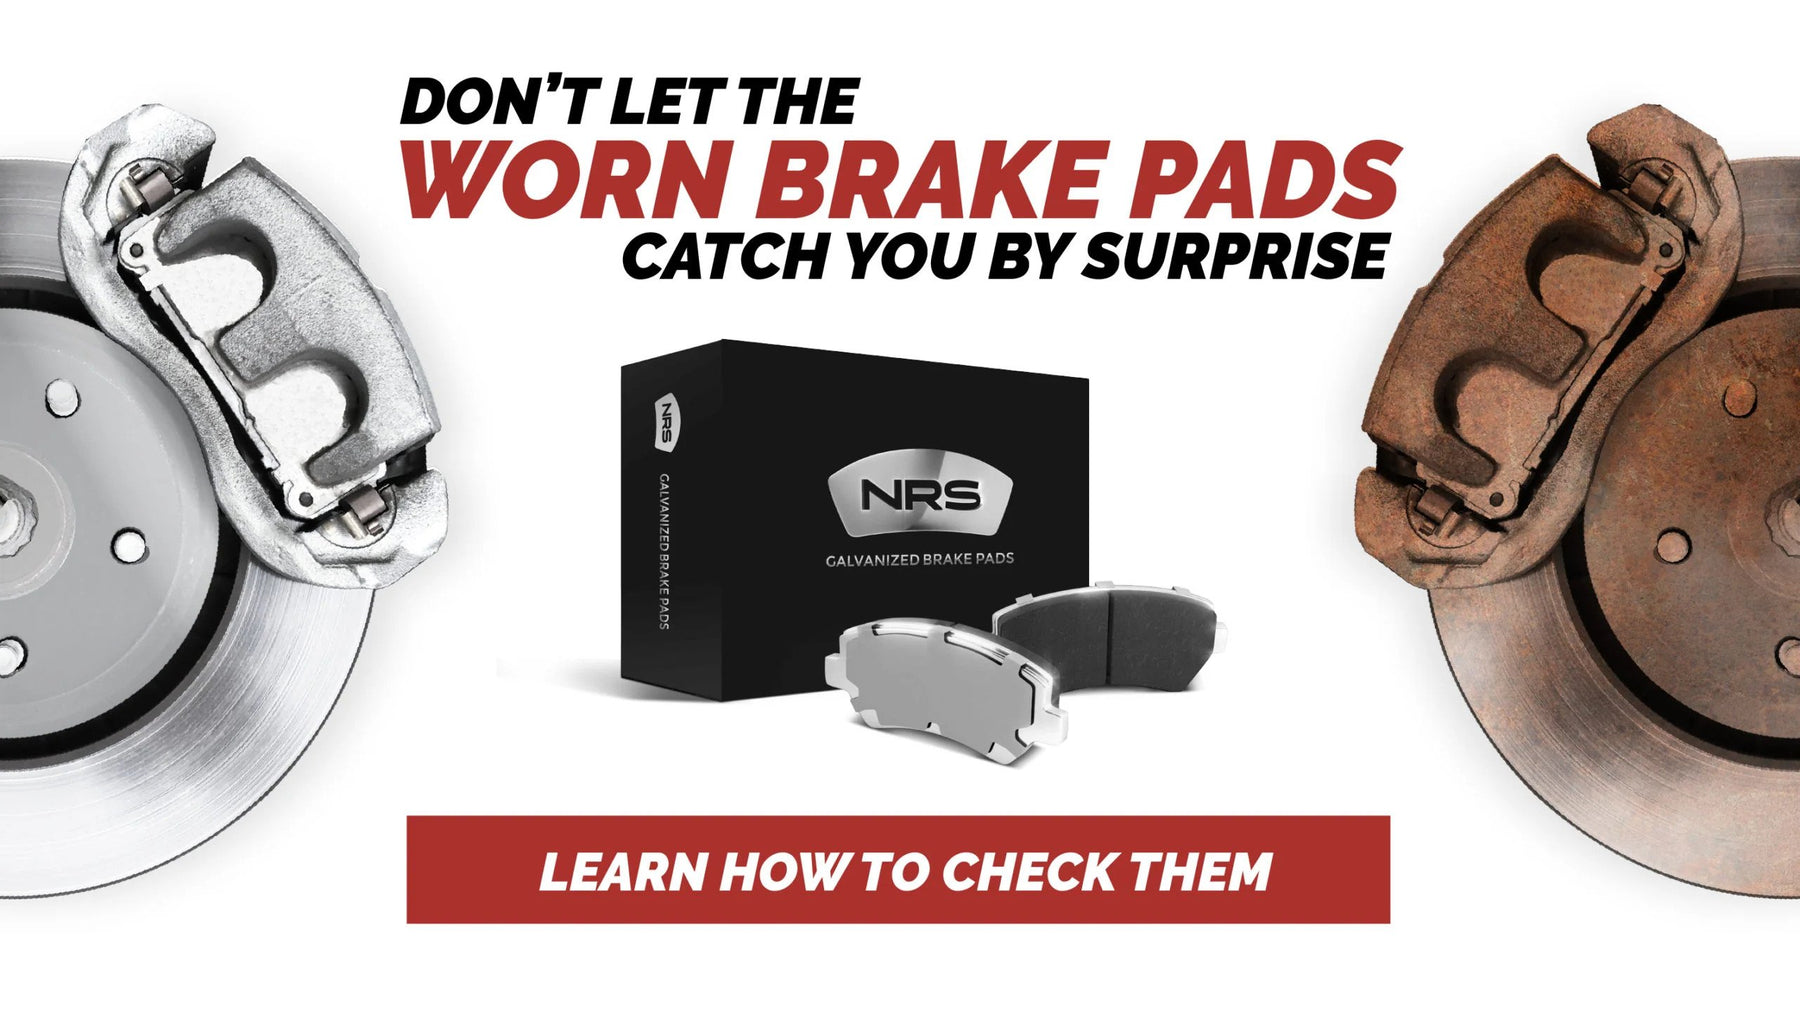 Don't Let Worn Brake Pads Catch You by Surprise: Learn How to Check Them